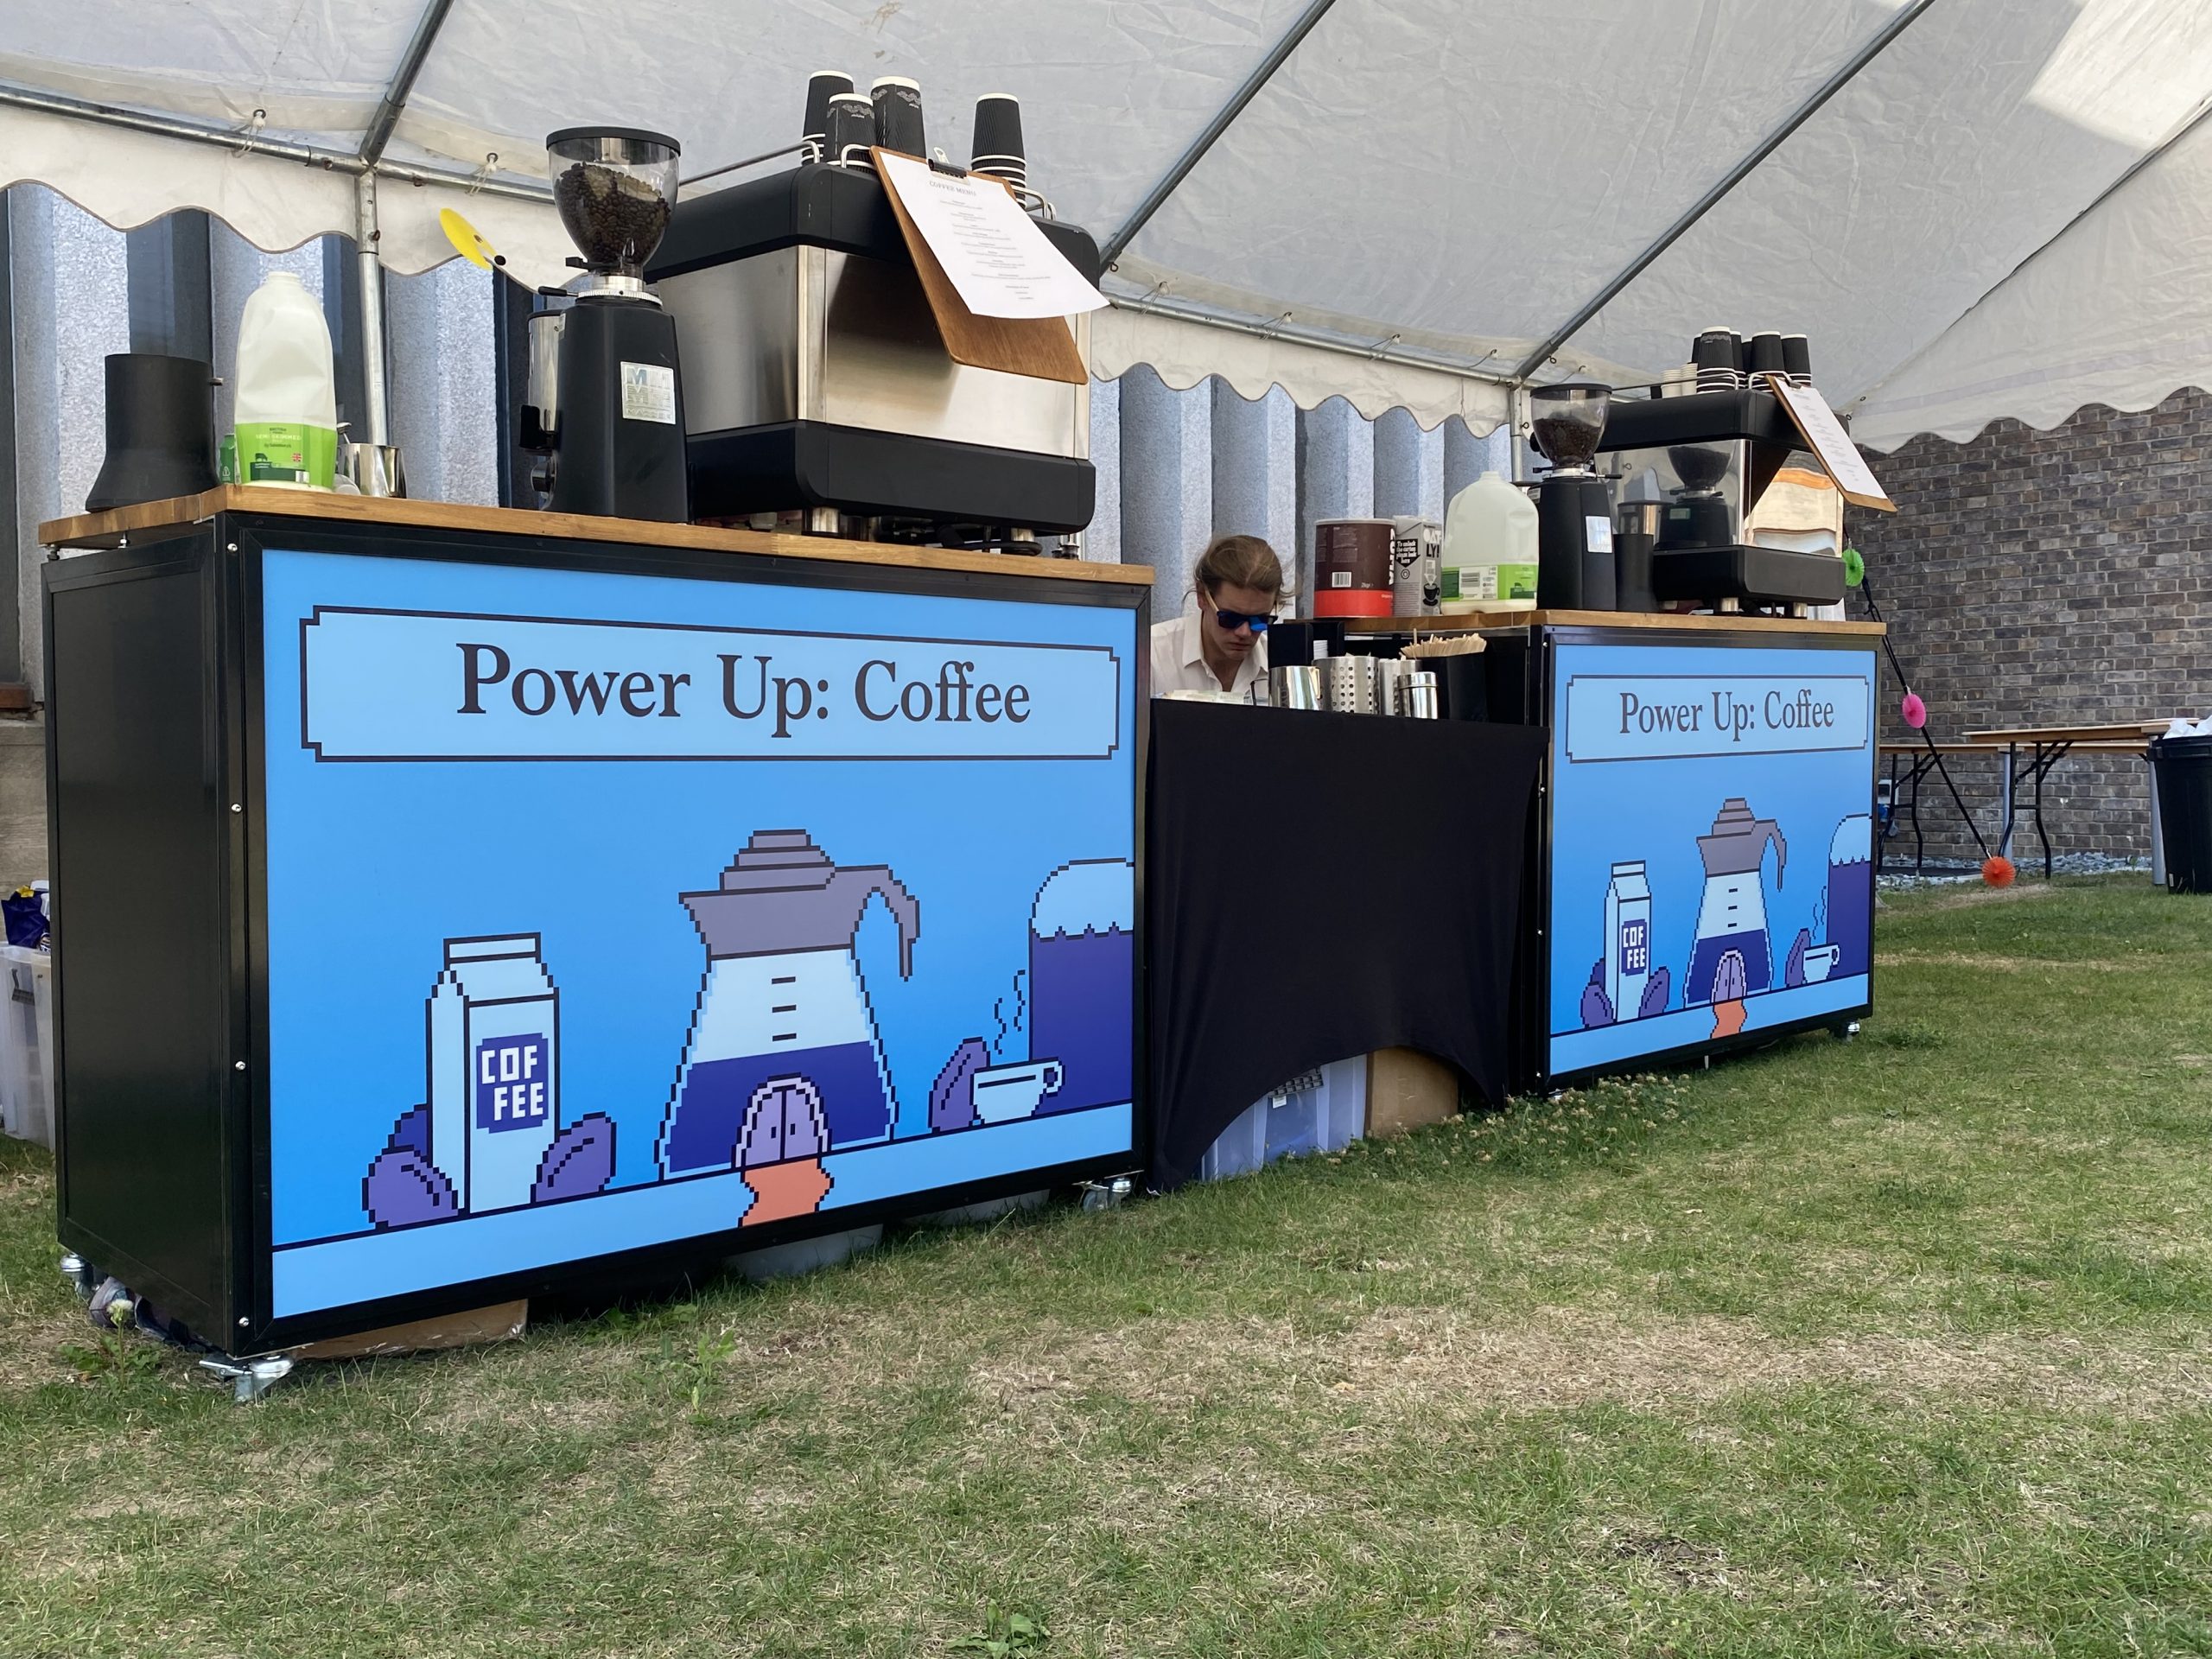 The Mobile Coffee Bean Power Up branded coffee bar for events